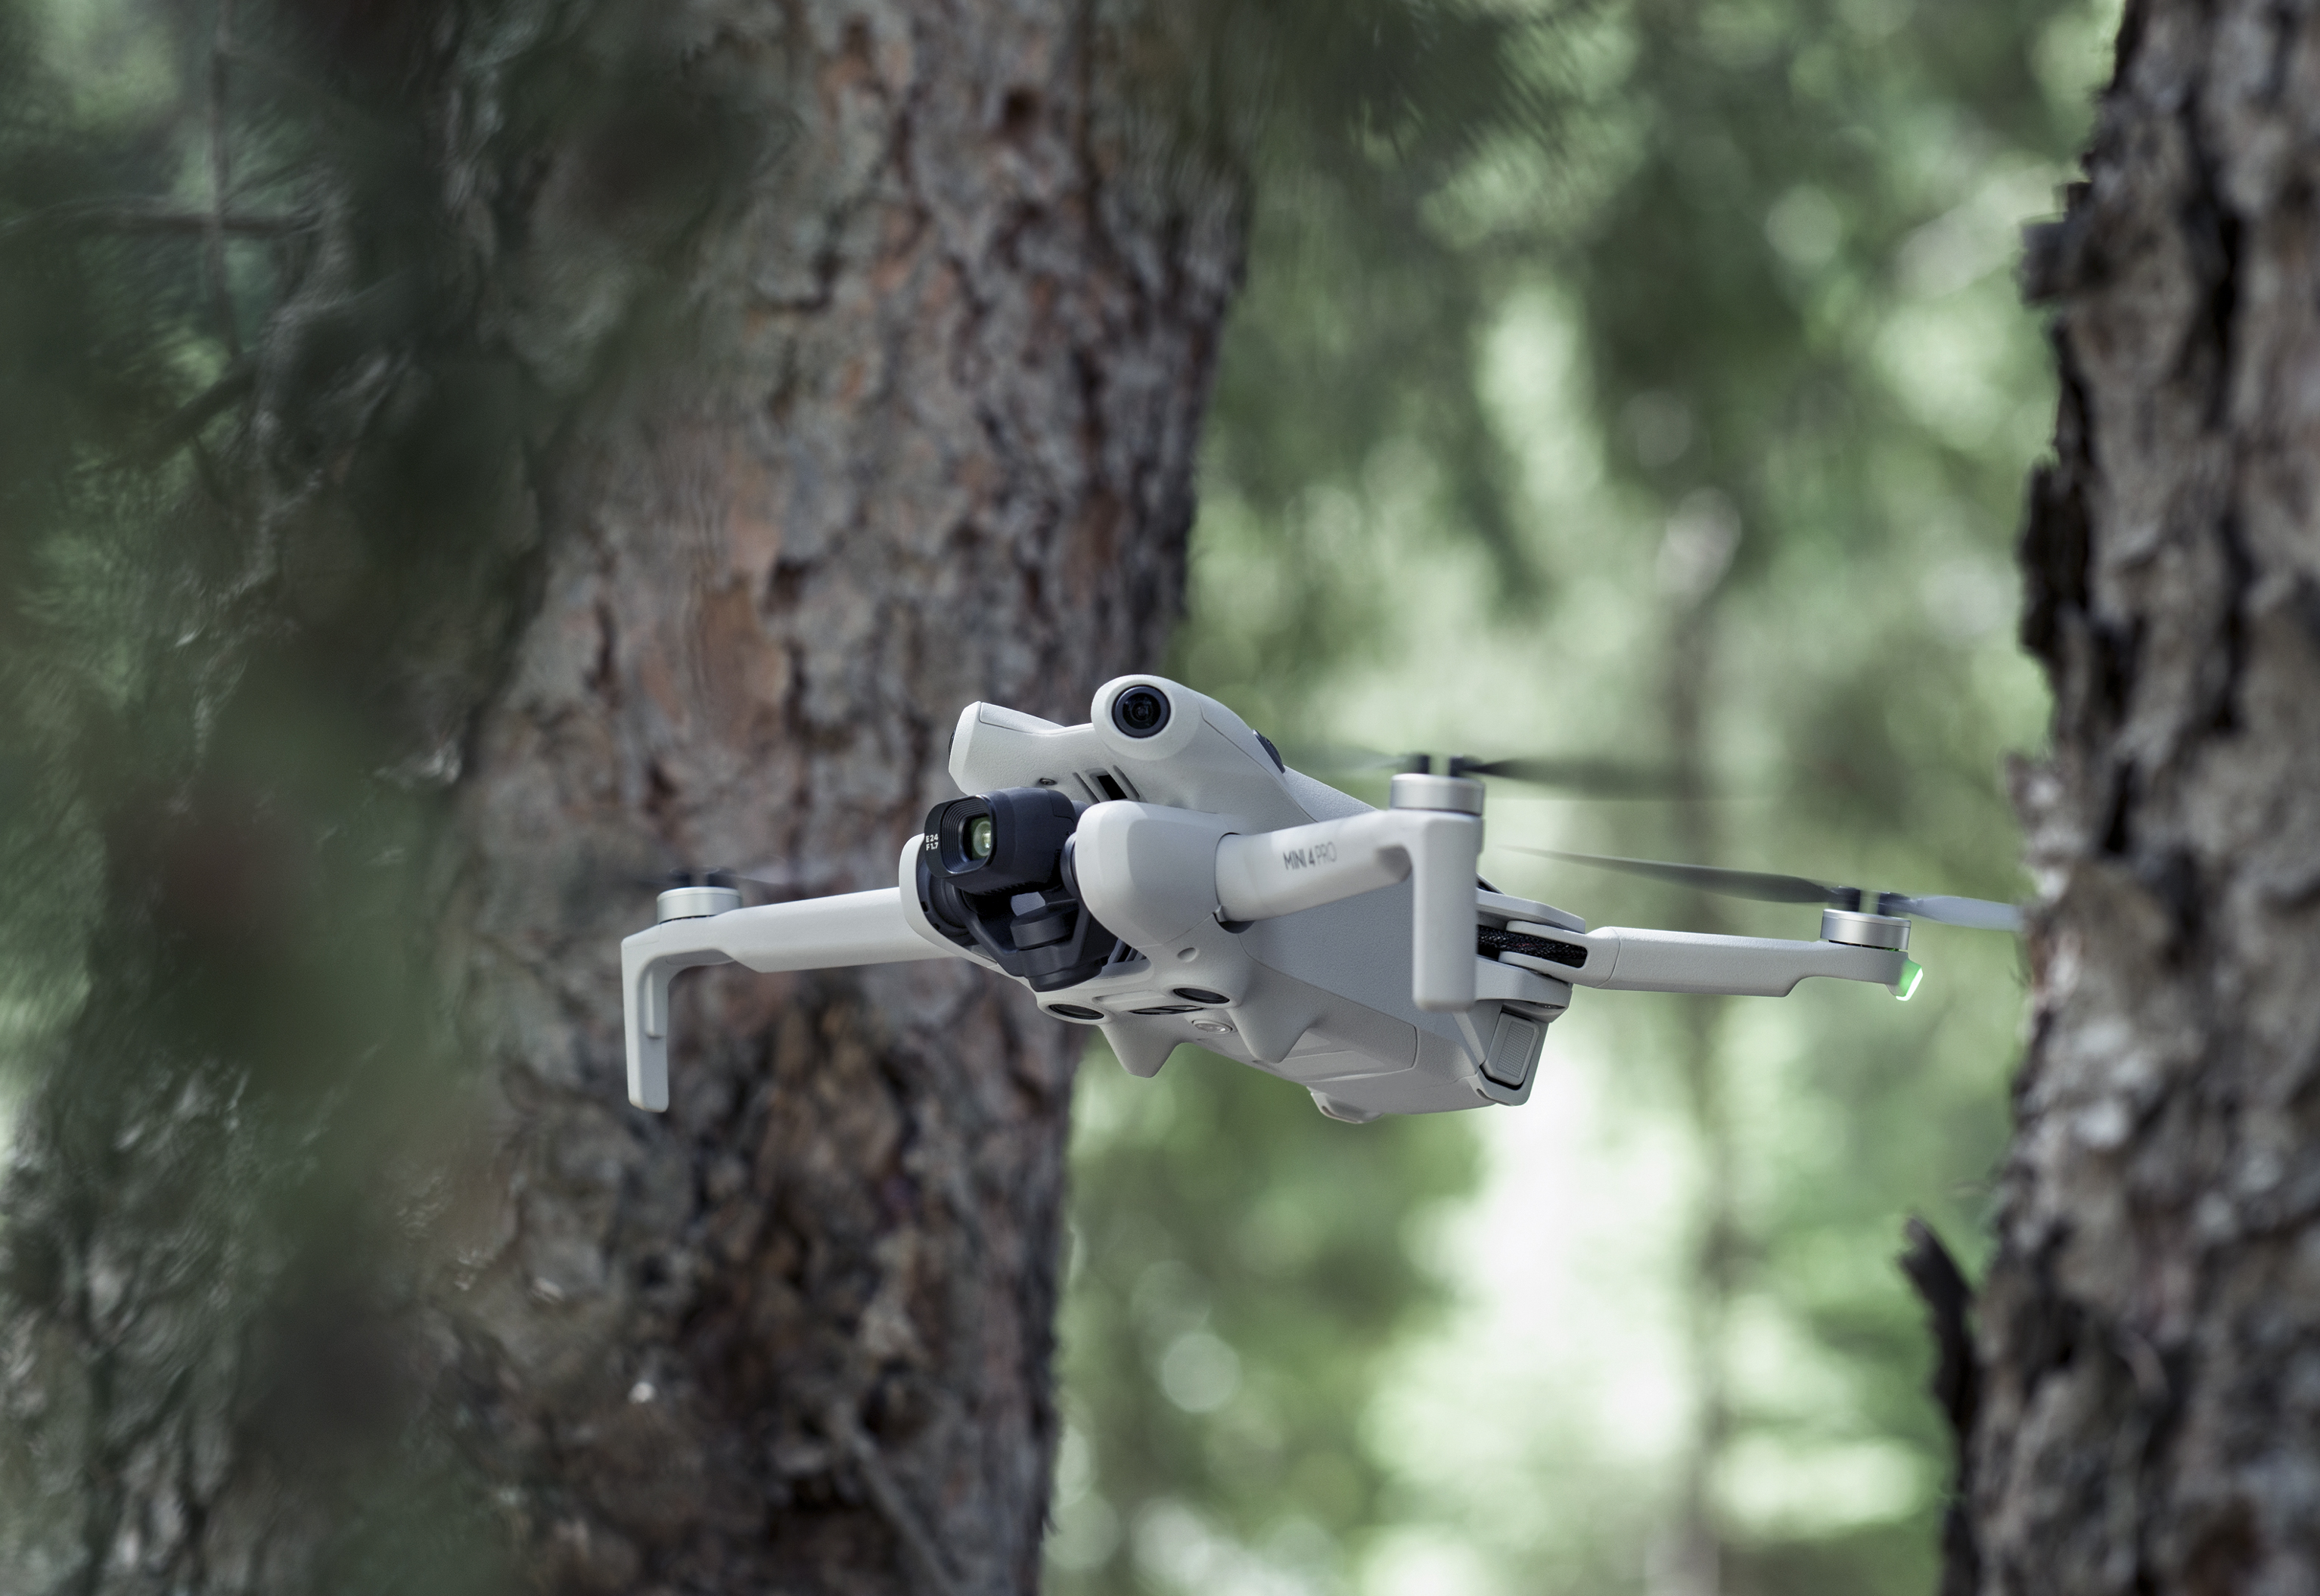 DJI Mini 4 Pro: New drone pictured in short test flight before release -   News